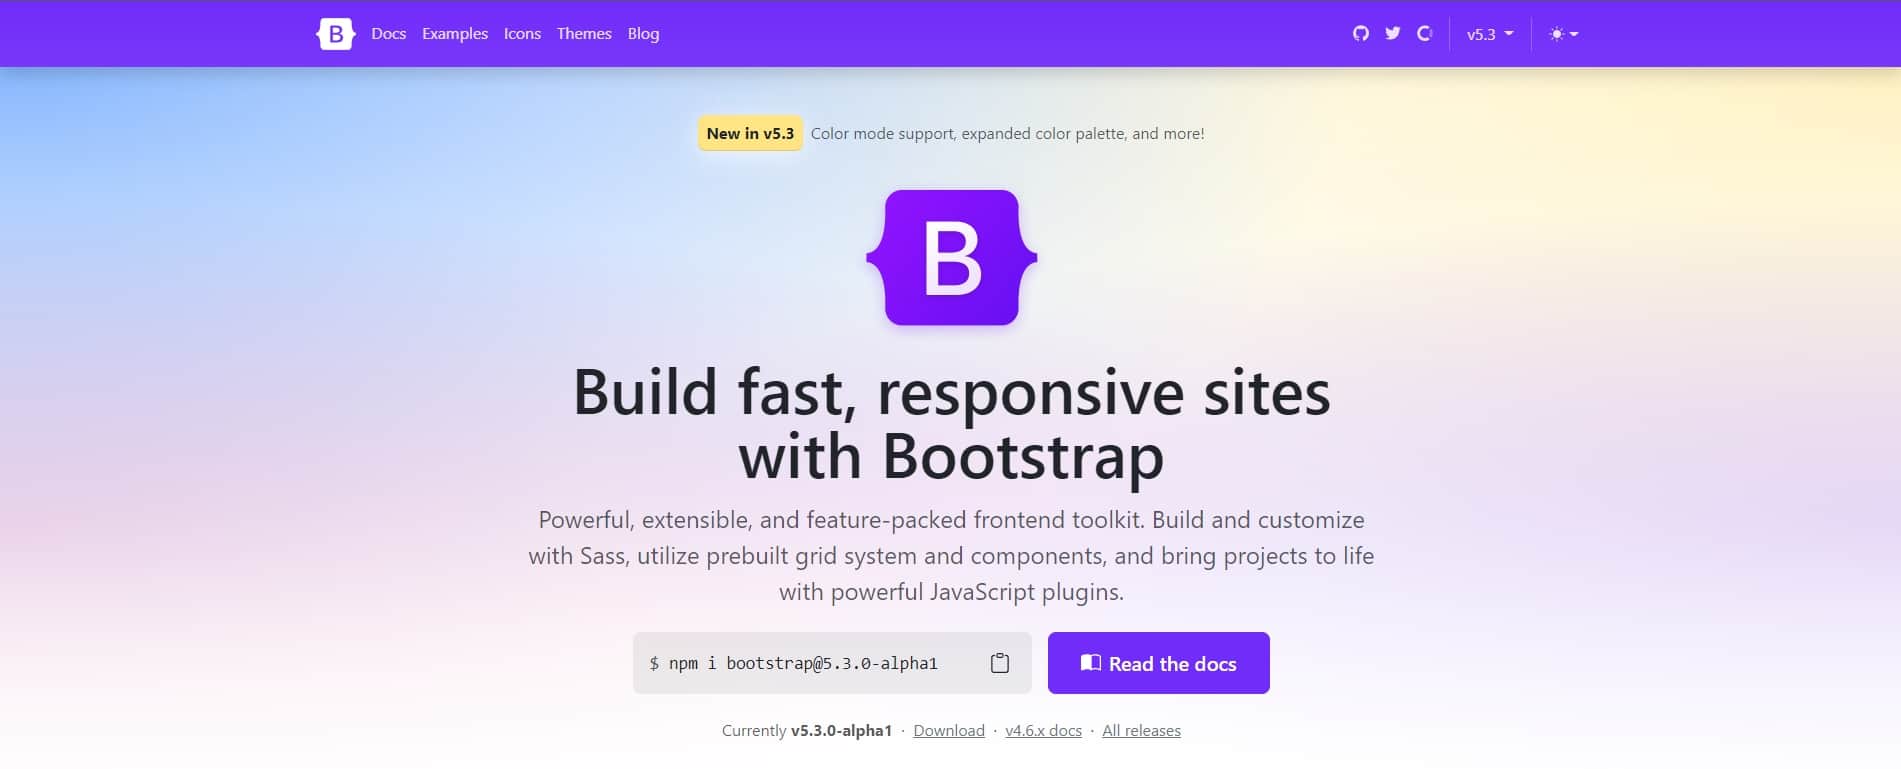 Bootstrap featured image